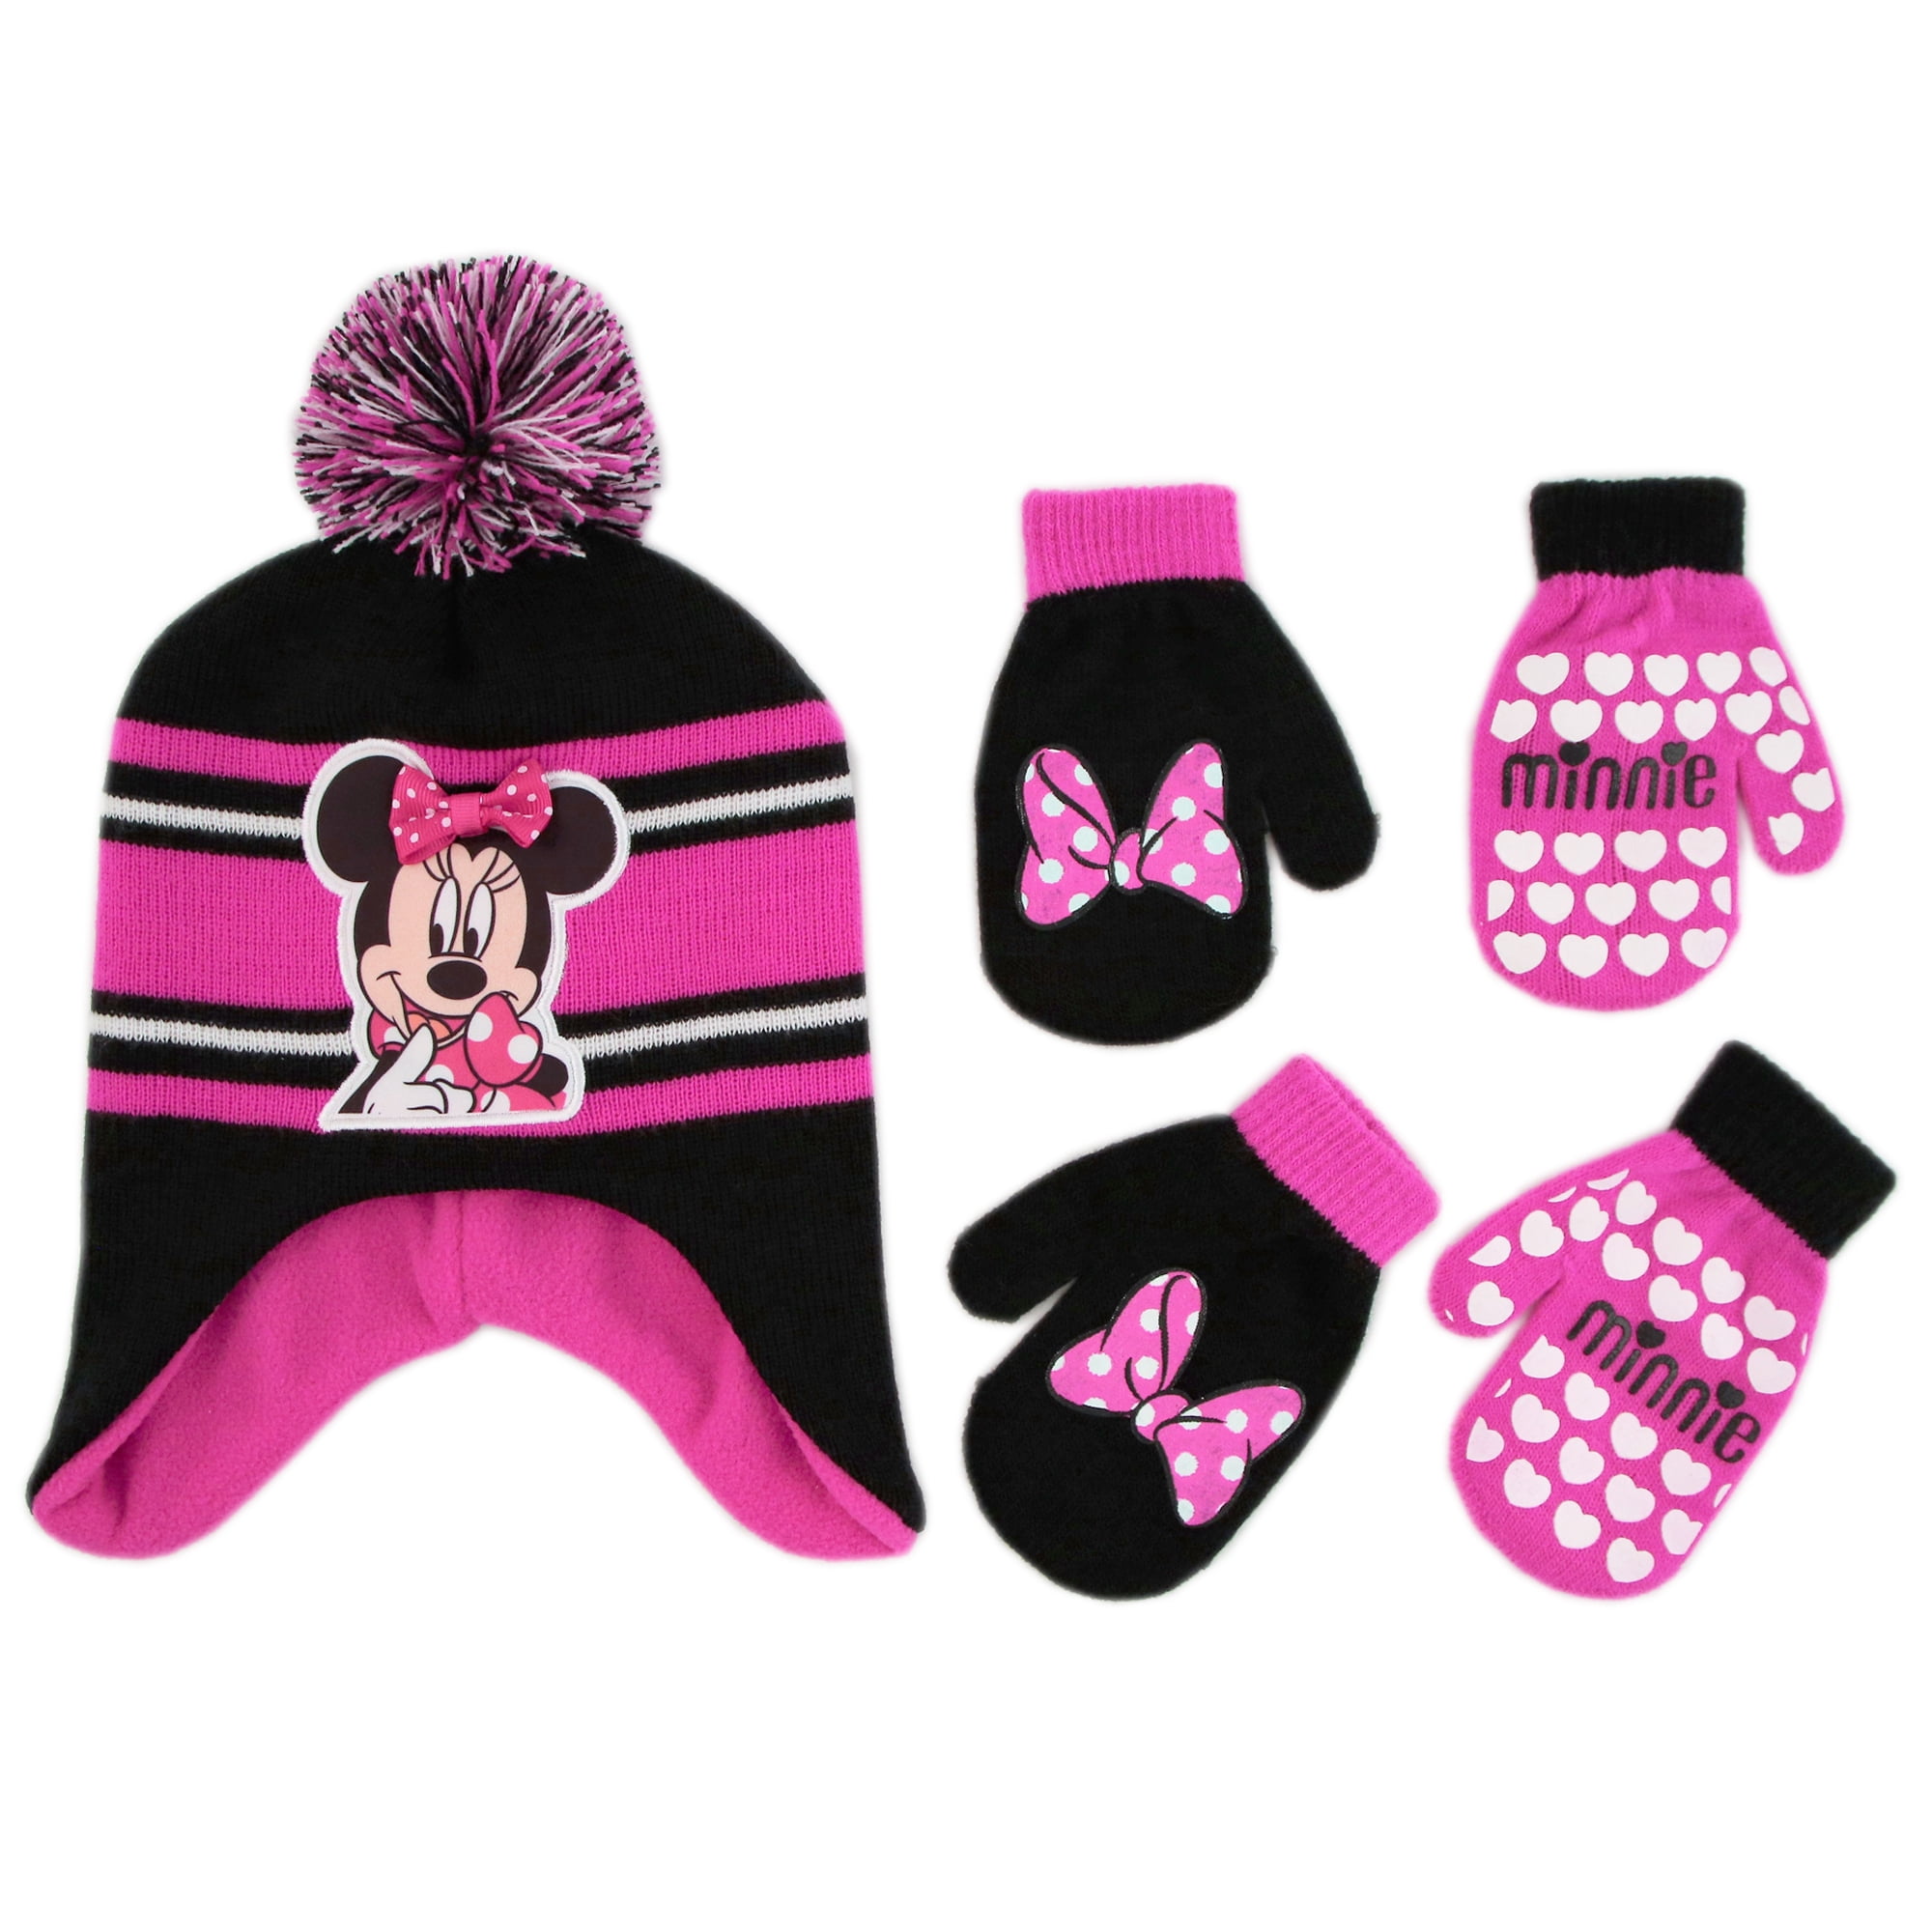 Disney Minnie Mouse Beanie Hat and Gloves SetKids Winter Hat and Gloves